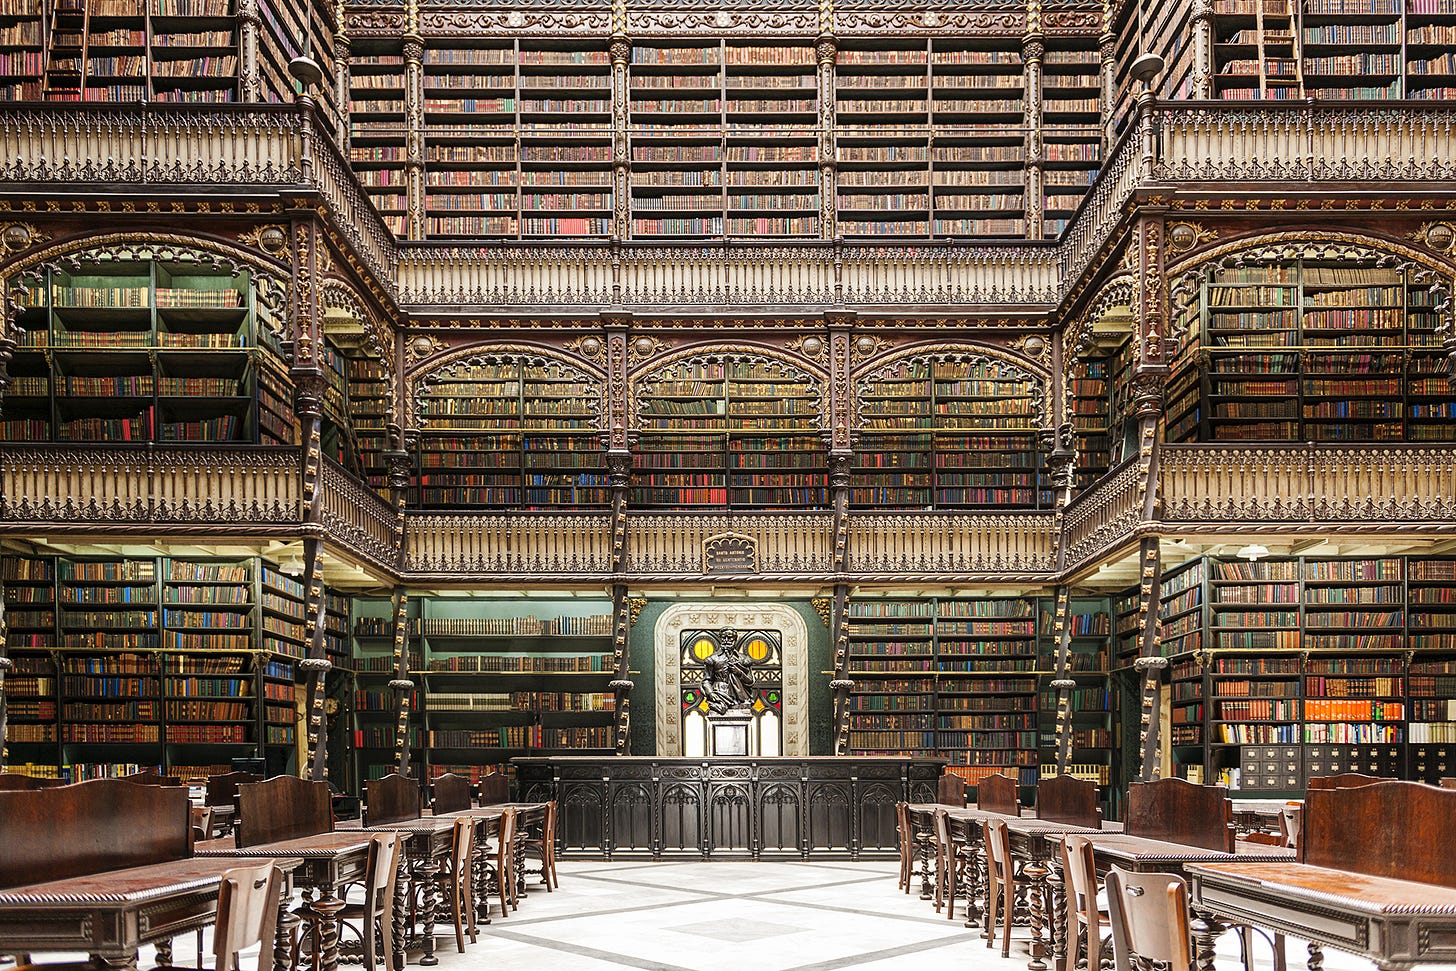 The 10 most beautiful historic libraries around the world